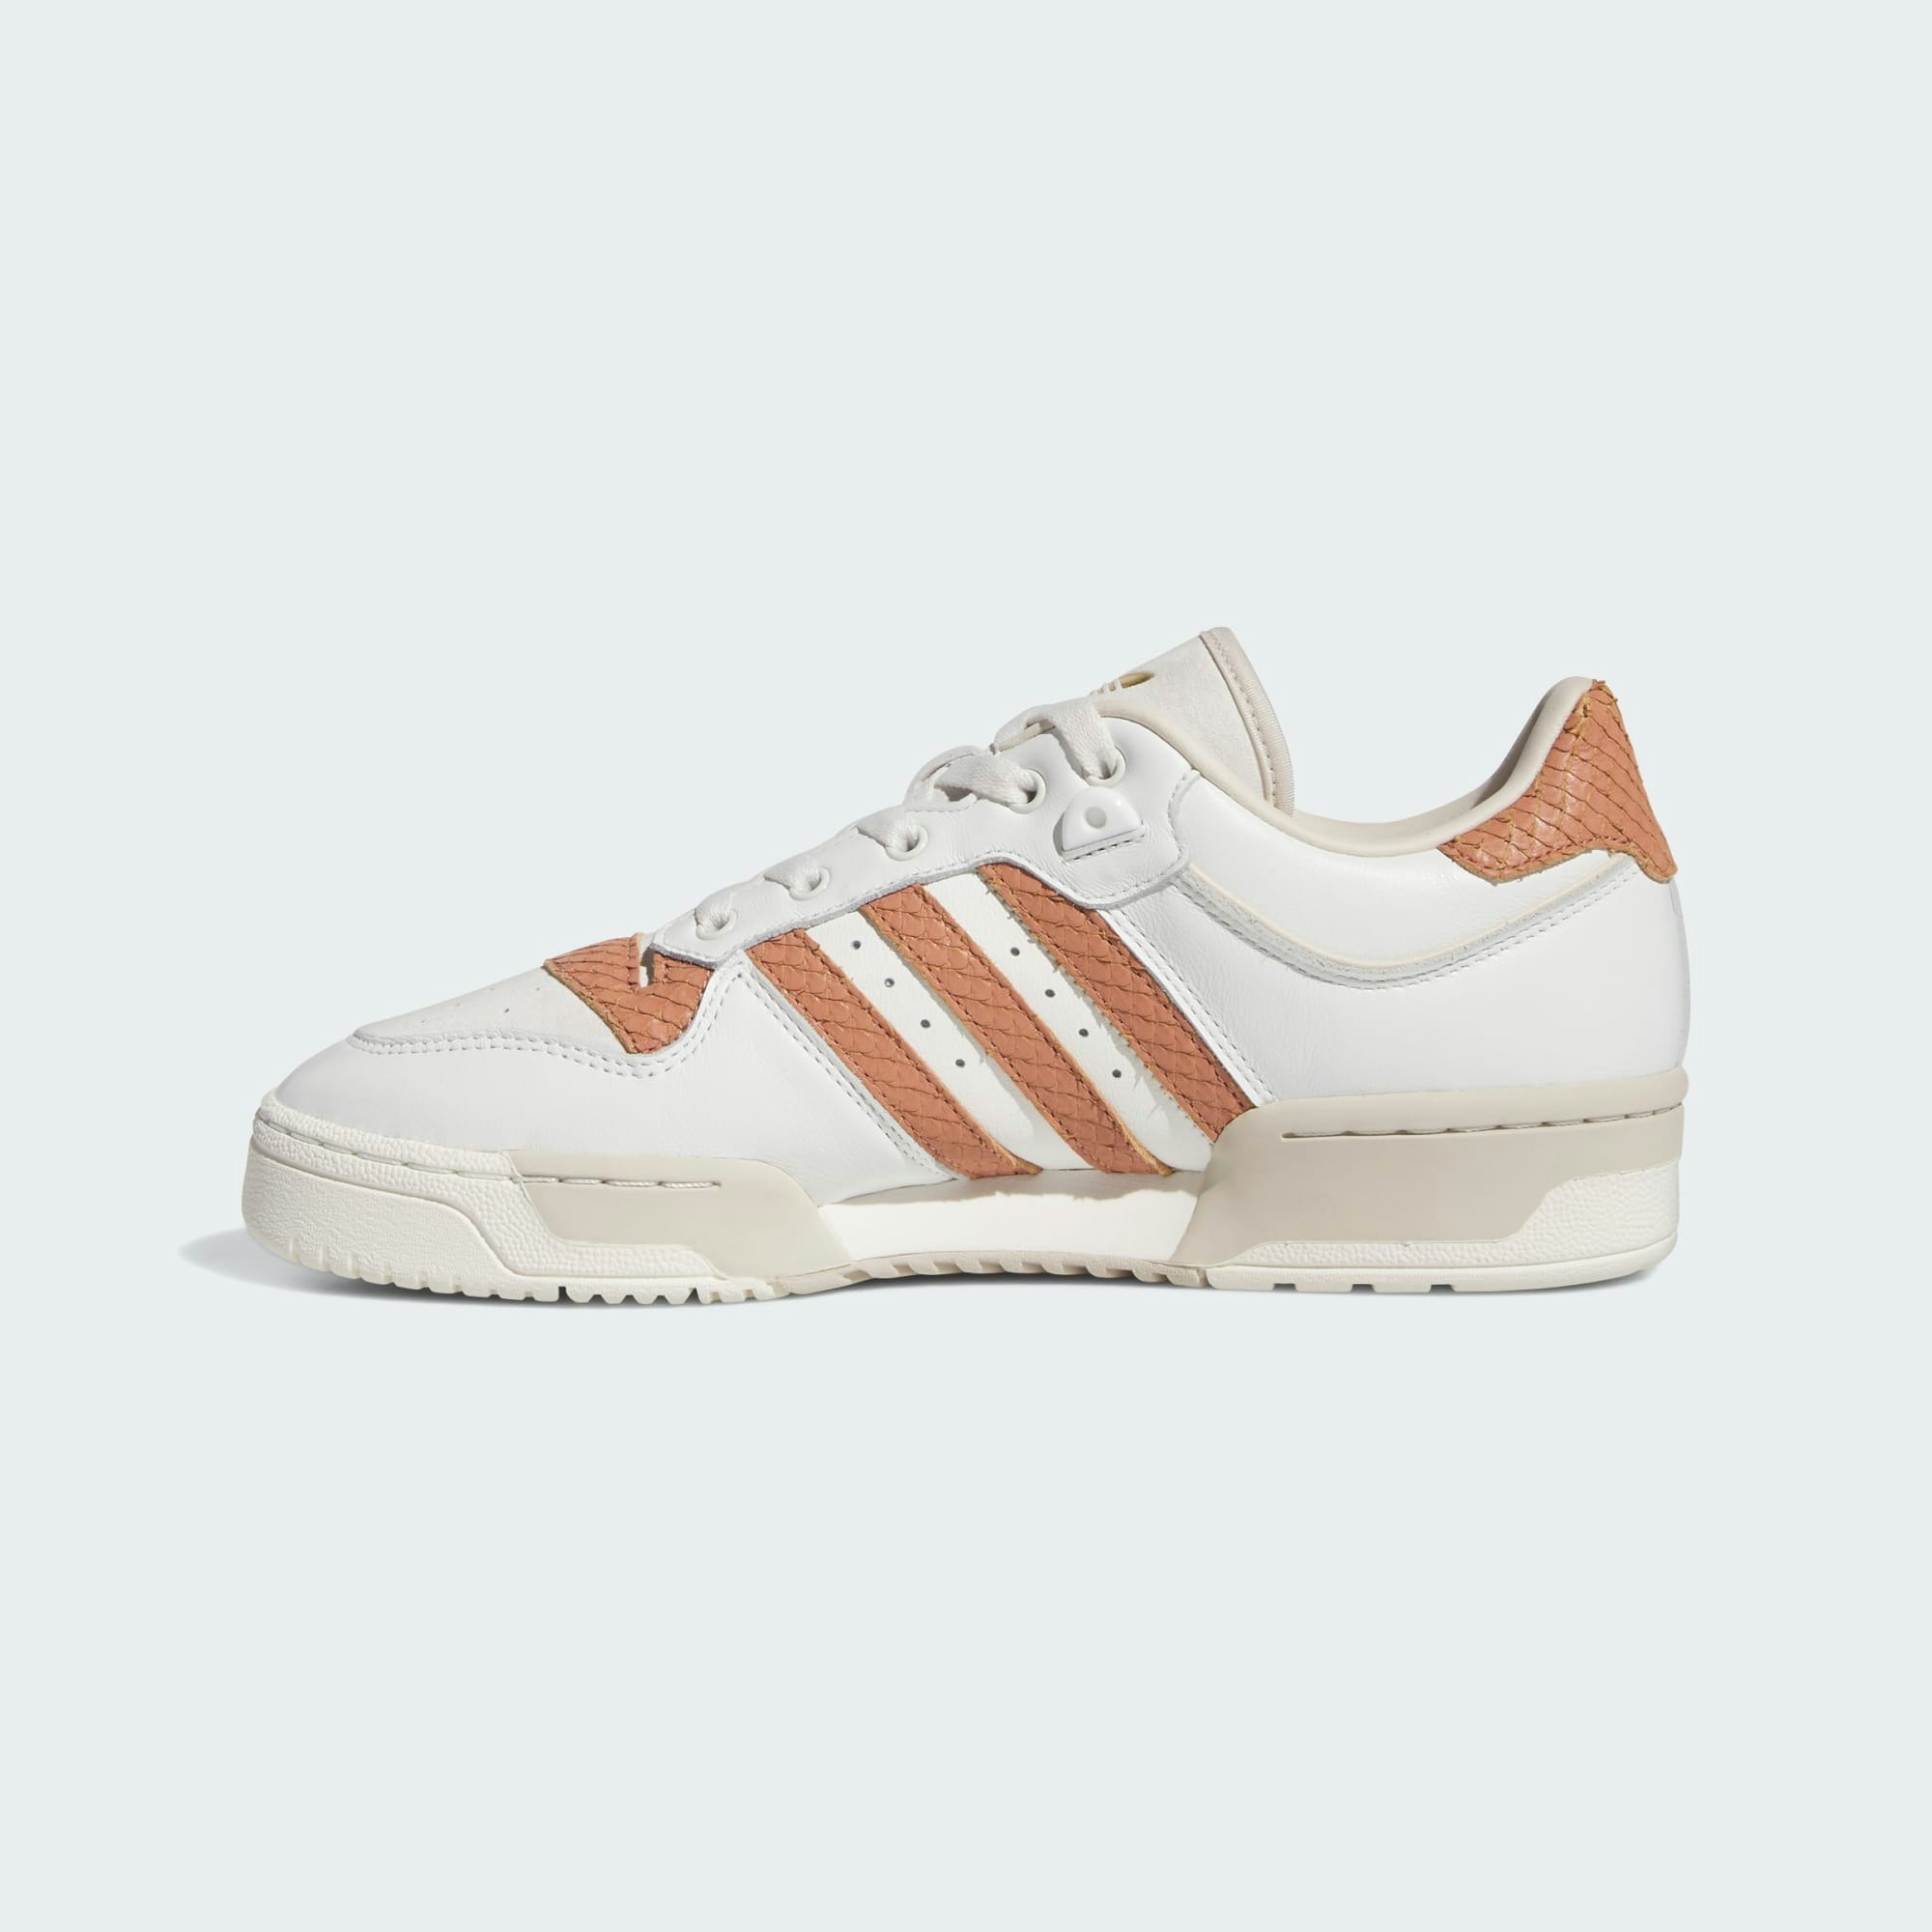 adidas Rivalry 86 Low "Clay Strata"